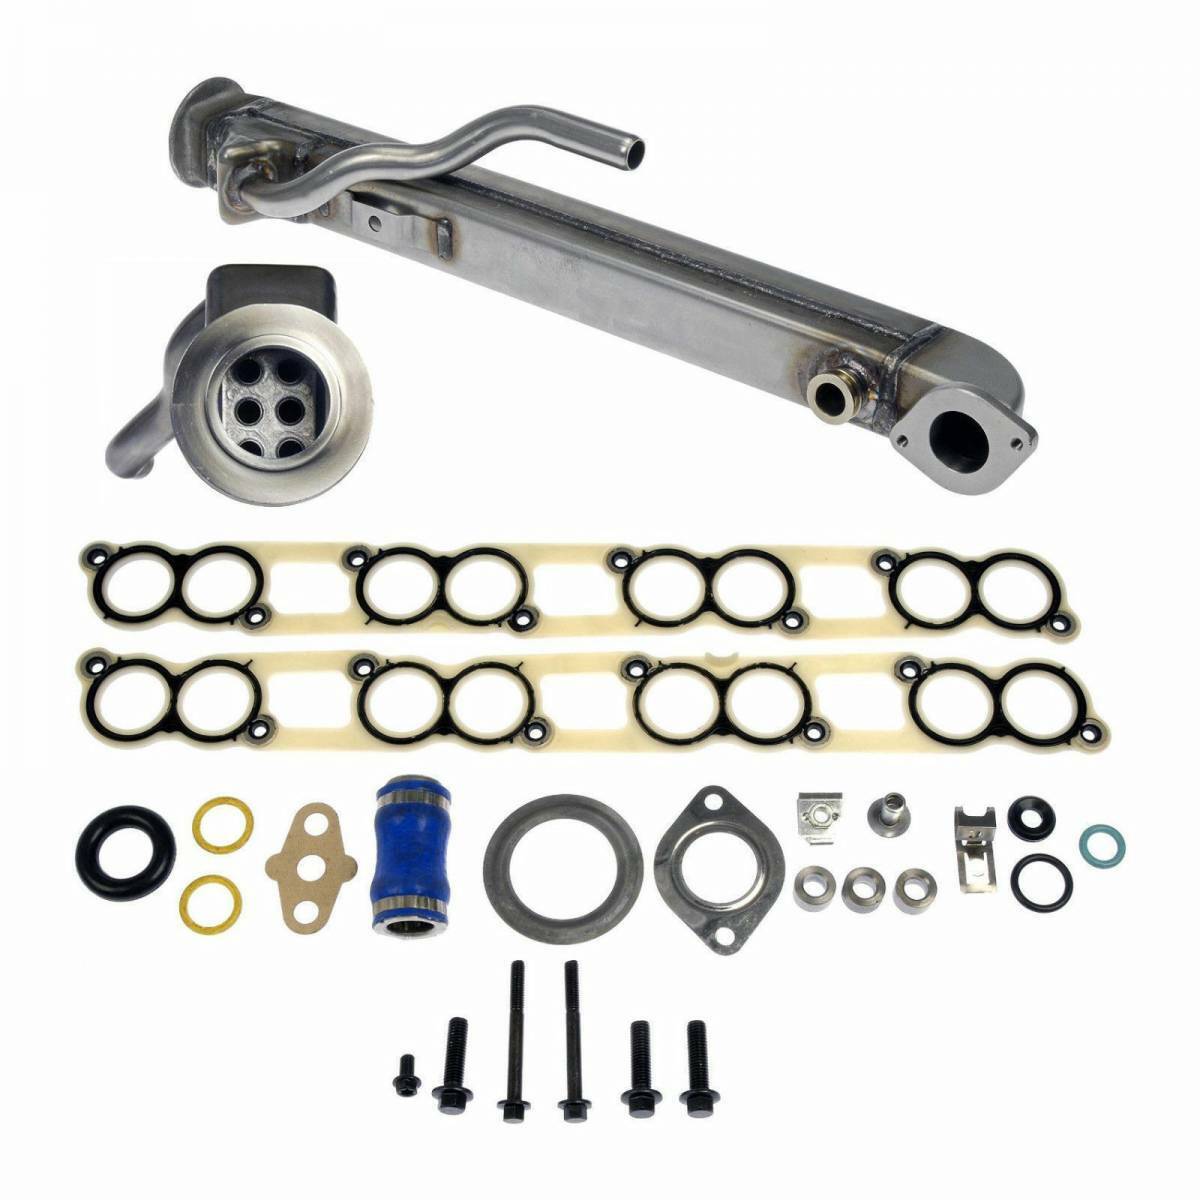 Rudy's Upgraded Square EGR Cooler & Gaskets For 04.5-07 Ford 6.0L Powerstroke